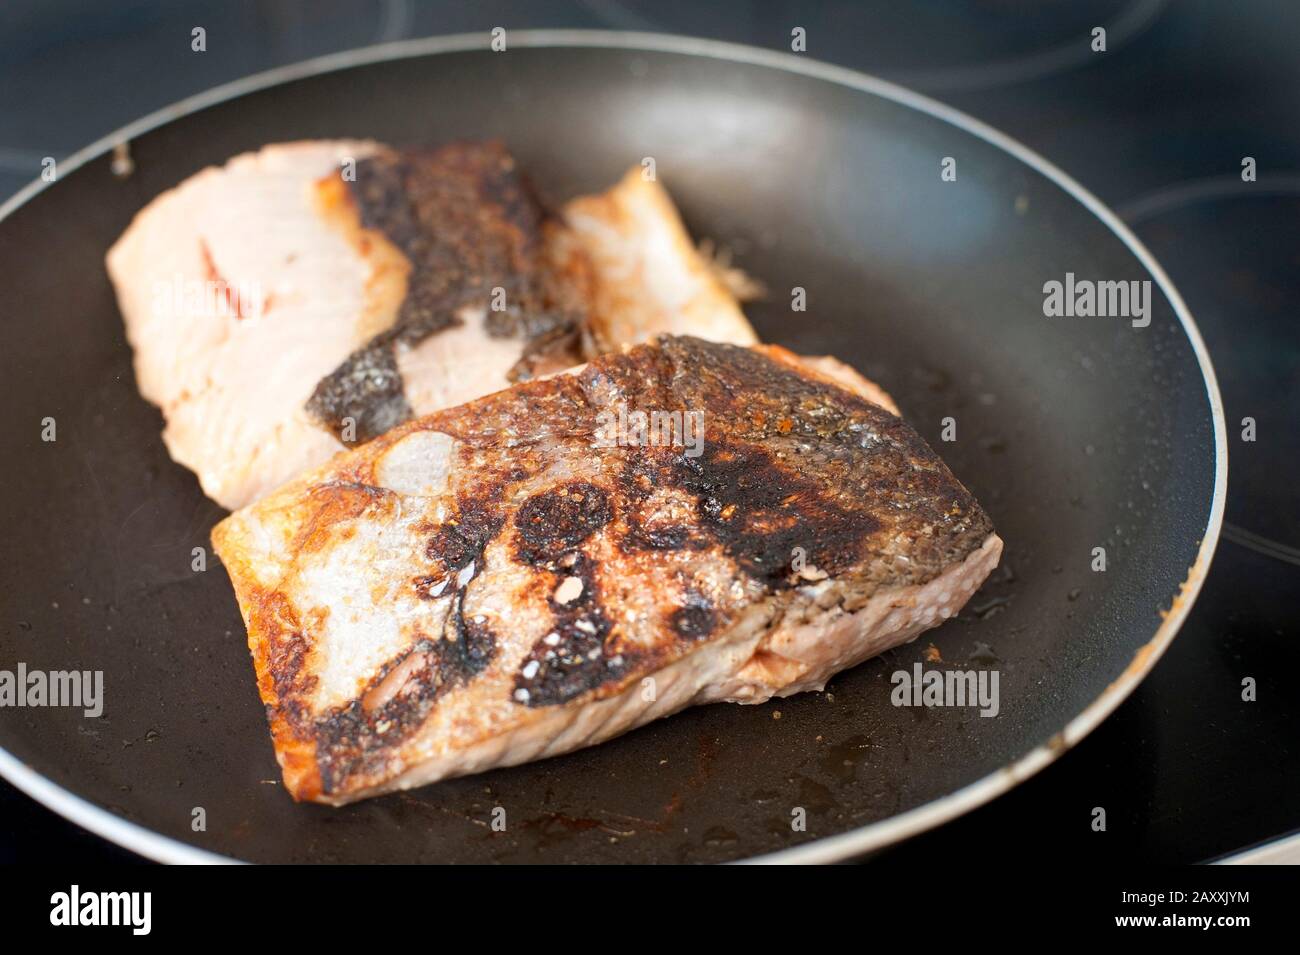 Searing salmon fish fillet steaks in a pan over the stove while pan-frying a delicious healthy seafood dinner Stock Photo